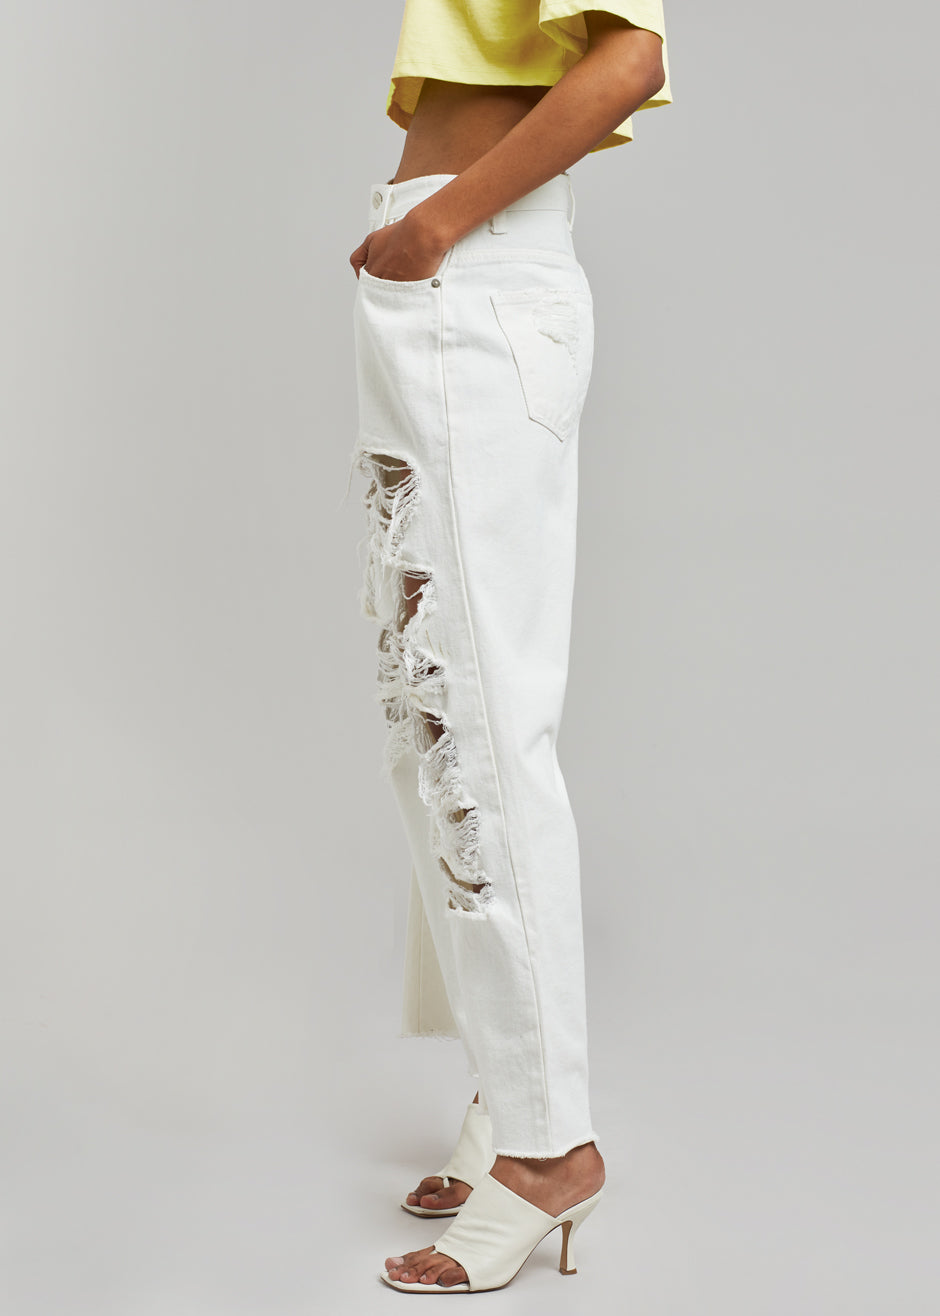 Tory Ripped Jeans - White - 11